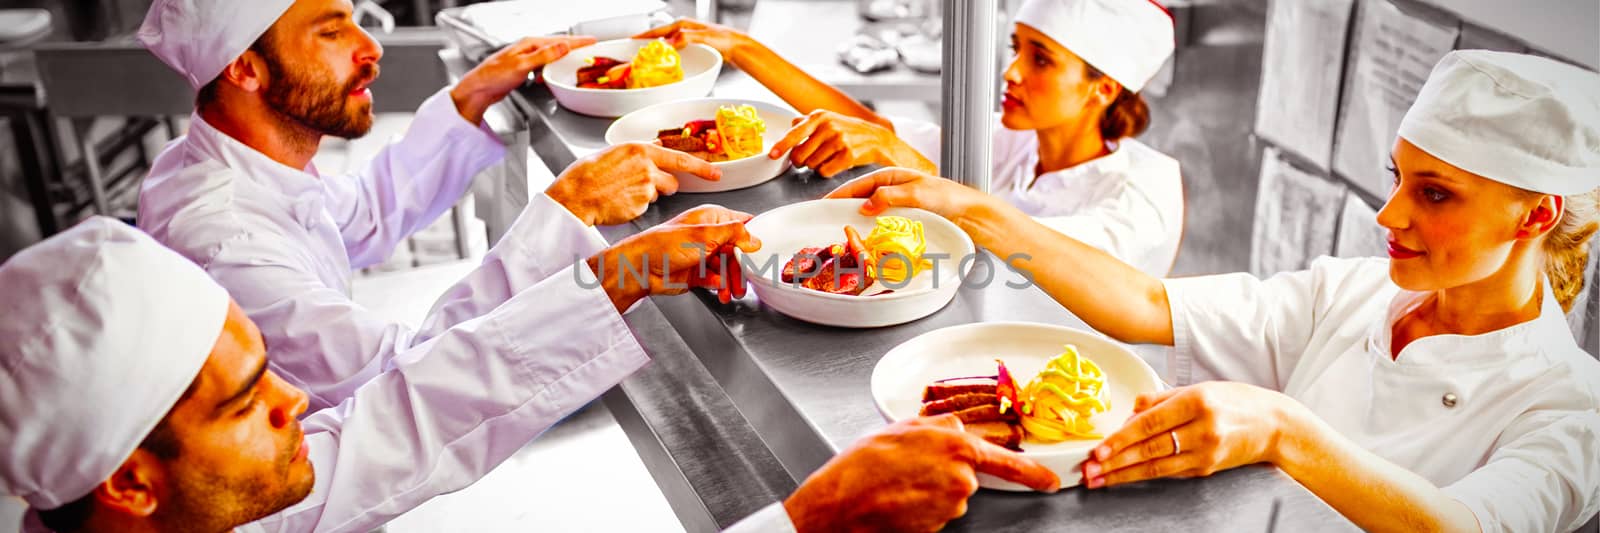 Chefs passing ready food to waiter at order station in commercial kitchen